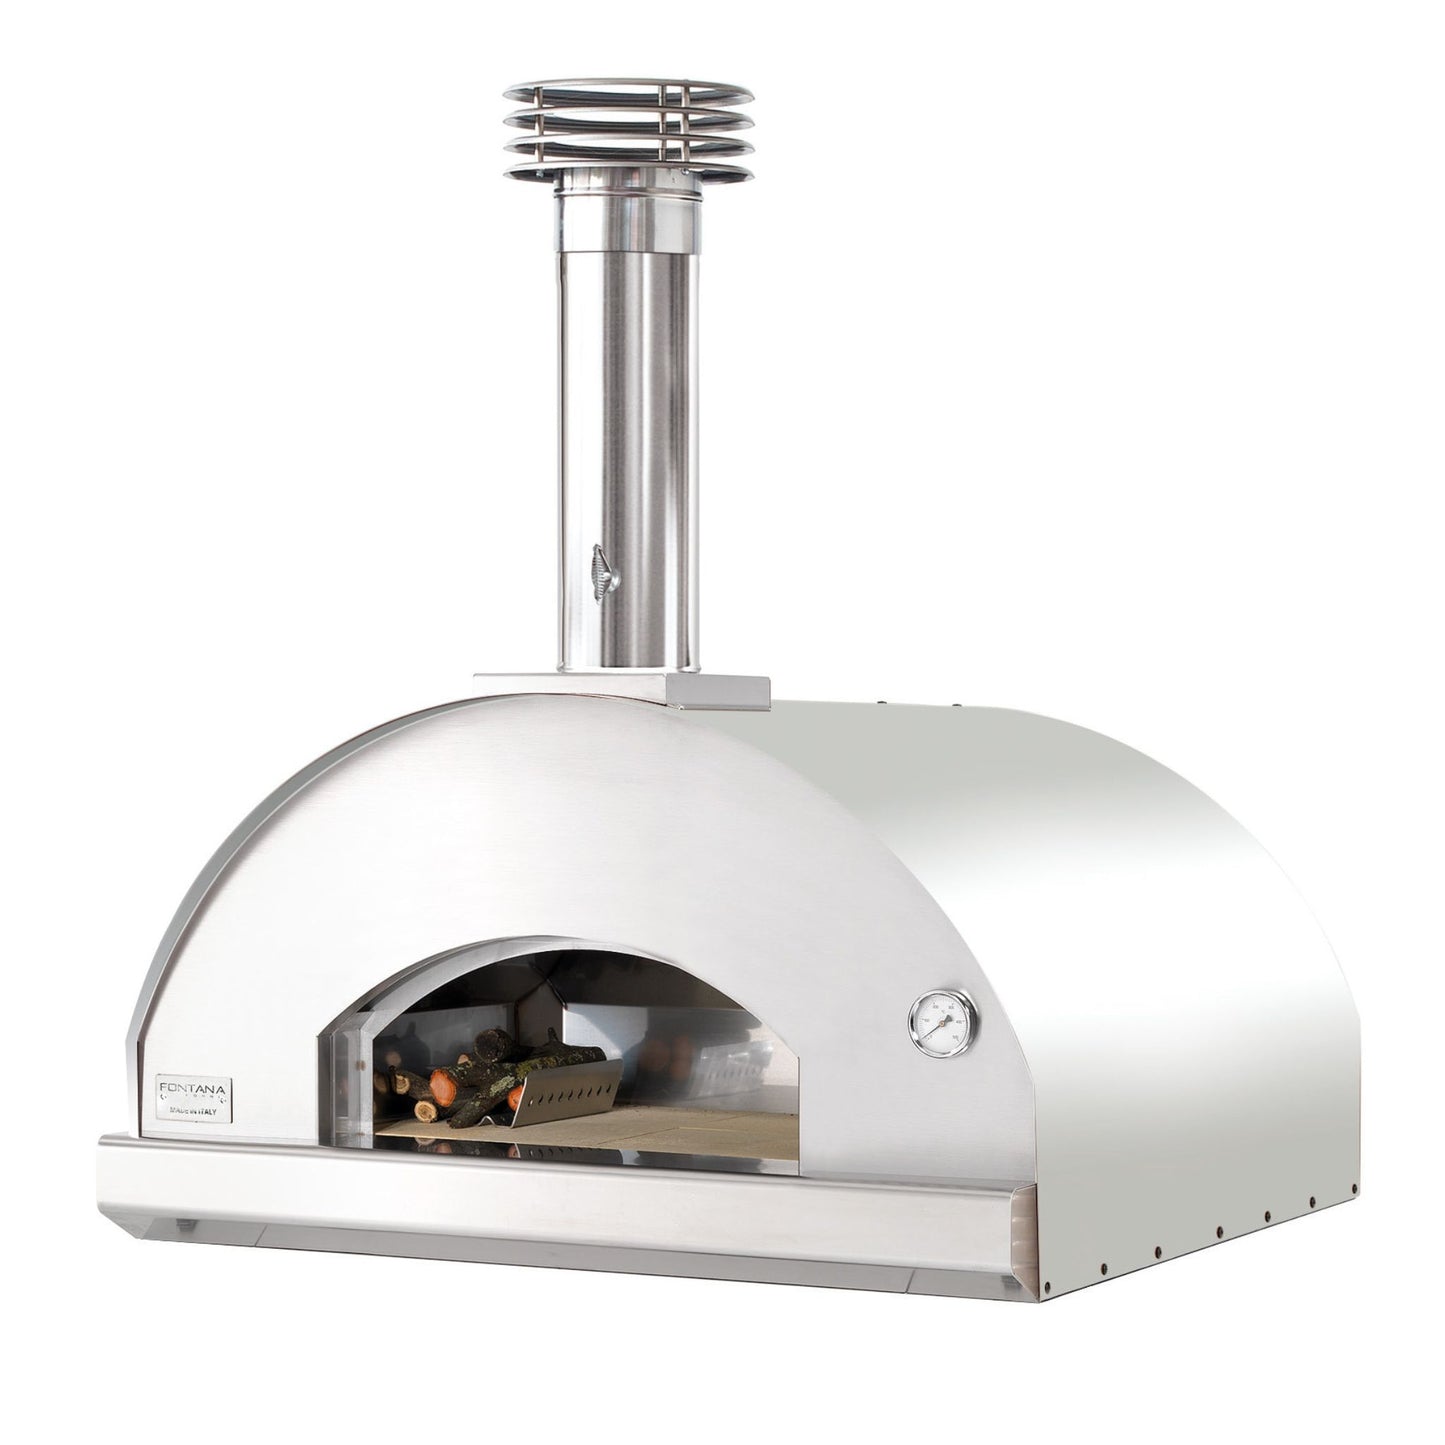 Fontana Marinara Stainless Steel Build In Wood Pizza Oven 